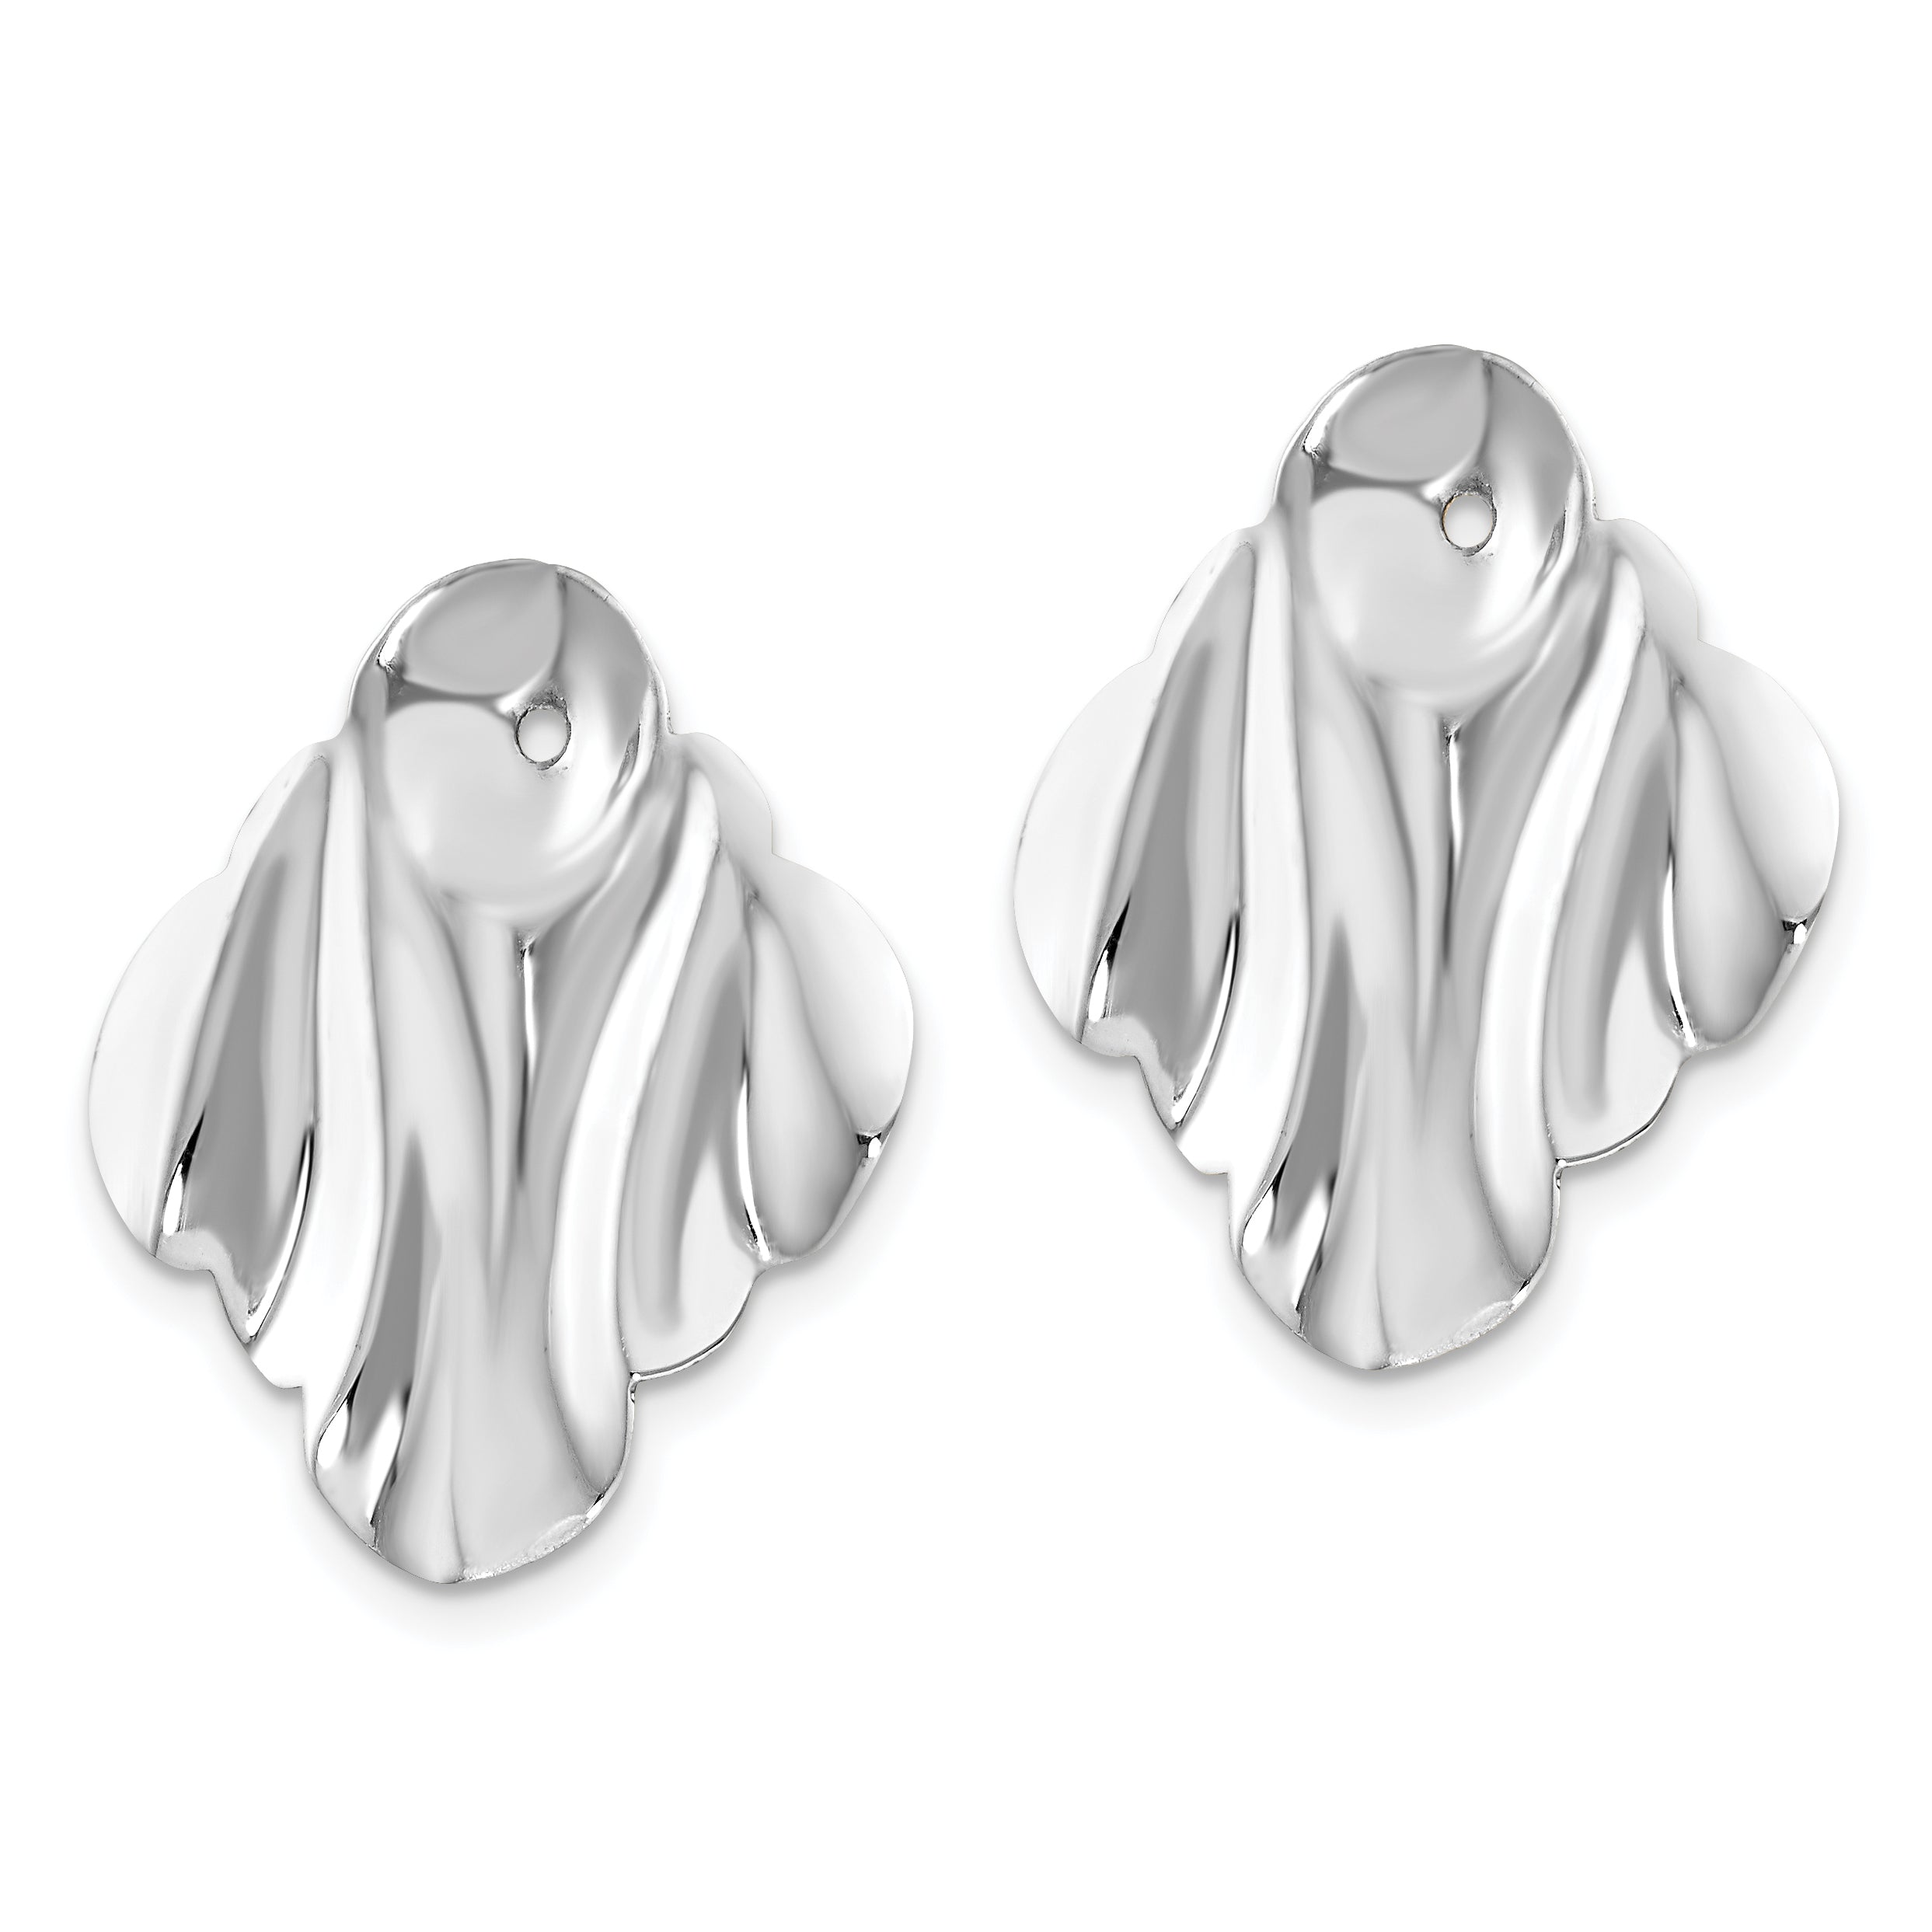 14k White Gold Polished Hammered Fancy Earring Jackets